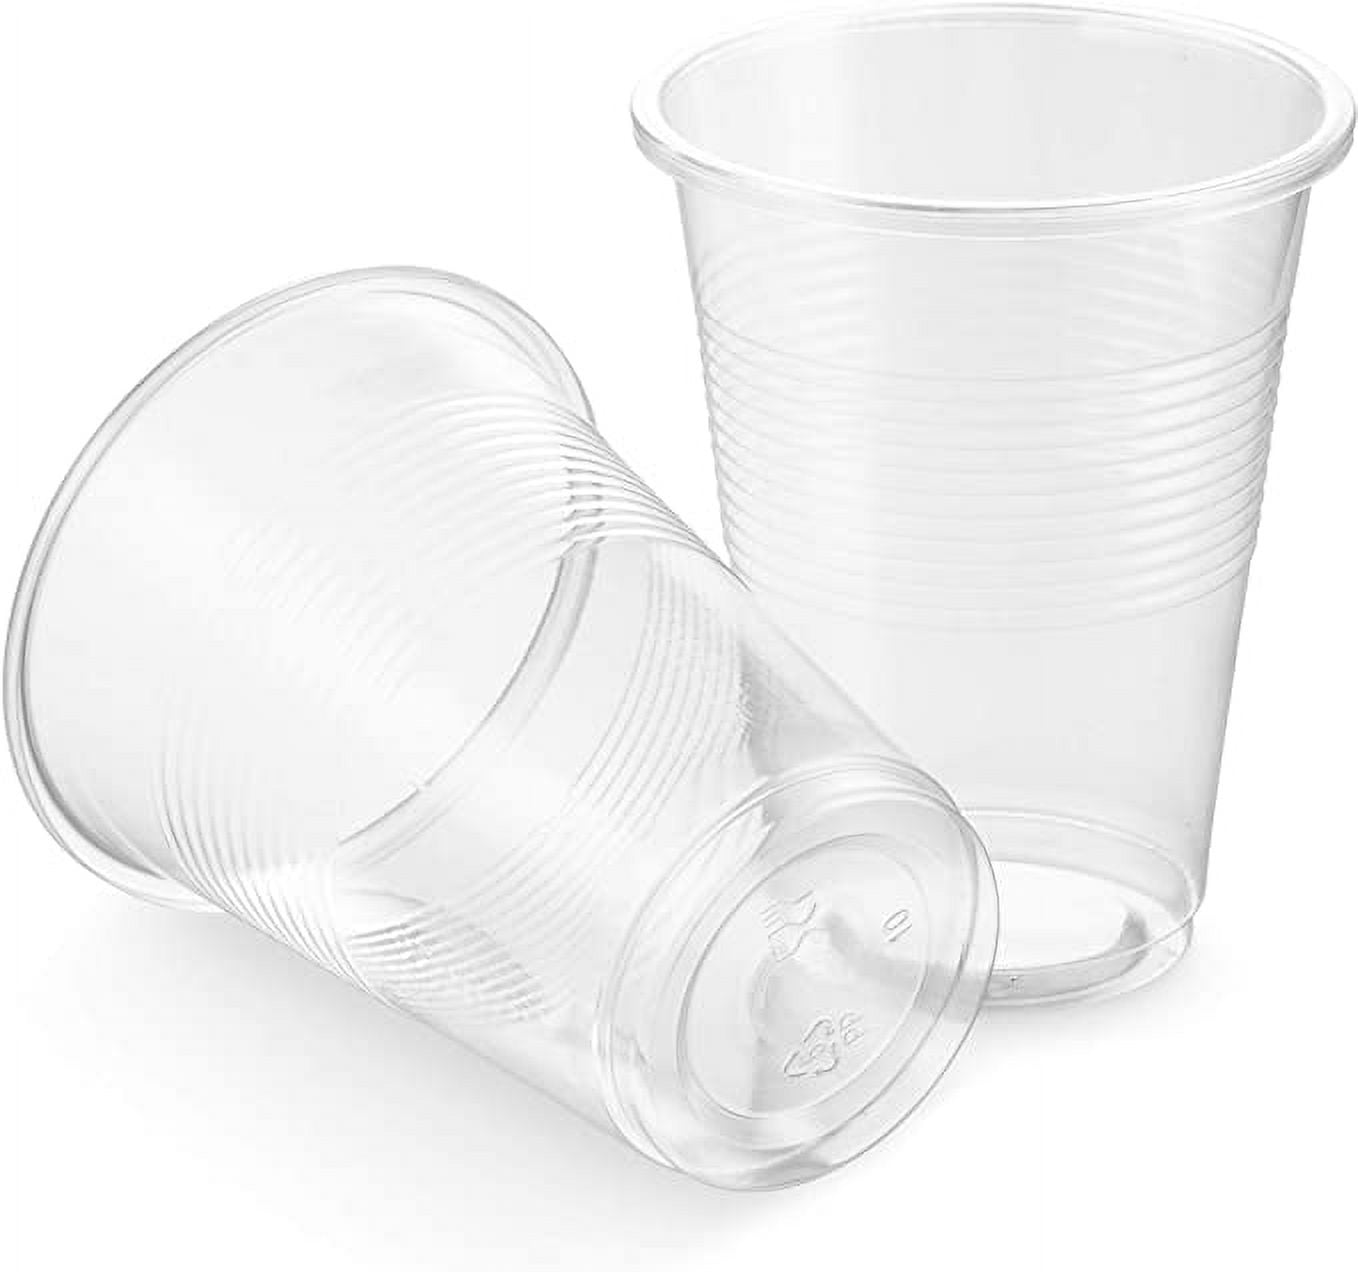 Crystal Solo Cups — Crystal Coated